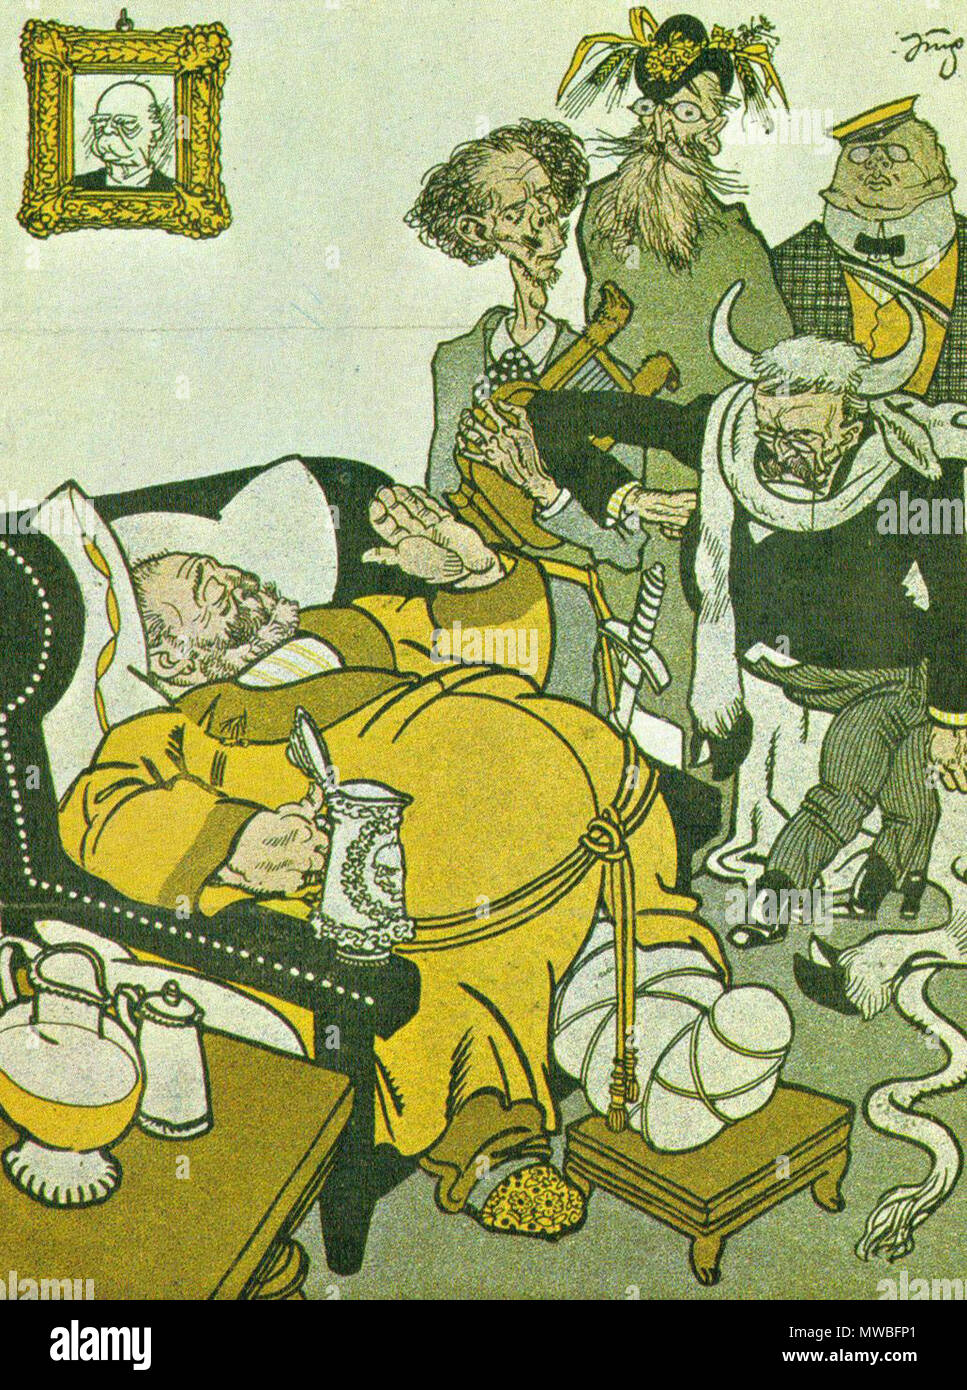 . Austrian politician Georg Schoenerer was sentenced to prison because in 1888 he conducted a raid on a newspaper office that had prematurely published the death notice of Kaiser Willhelm I. While doing so, he was drunk, and thus this political cartoon responds to his situation. . This file is lacking author information. 238 Georg Schoenerer Stock Photo